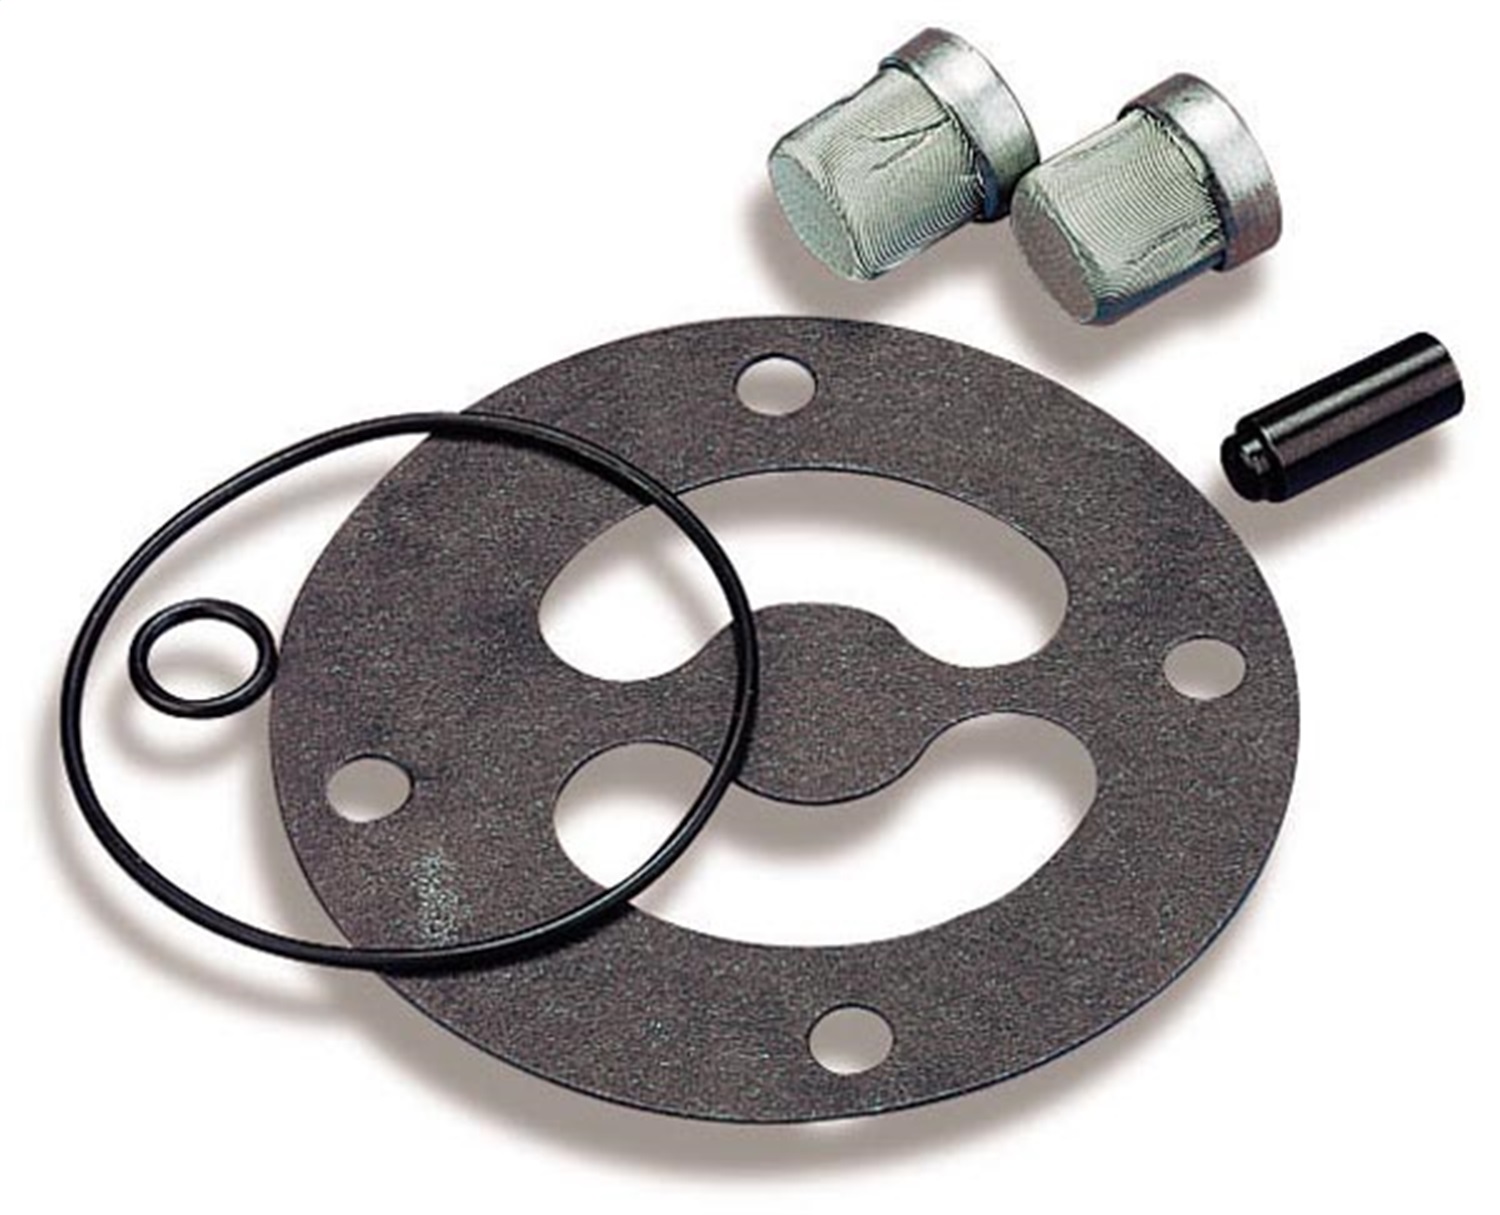 Holley Performance Holley Performance 12-751 Fuel Pump Gasket Kit